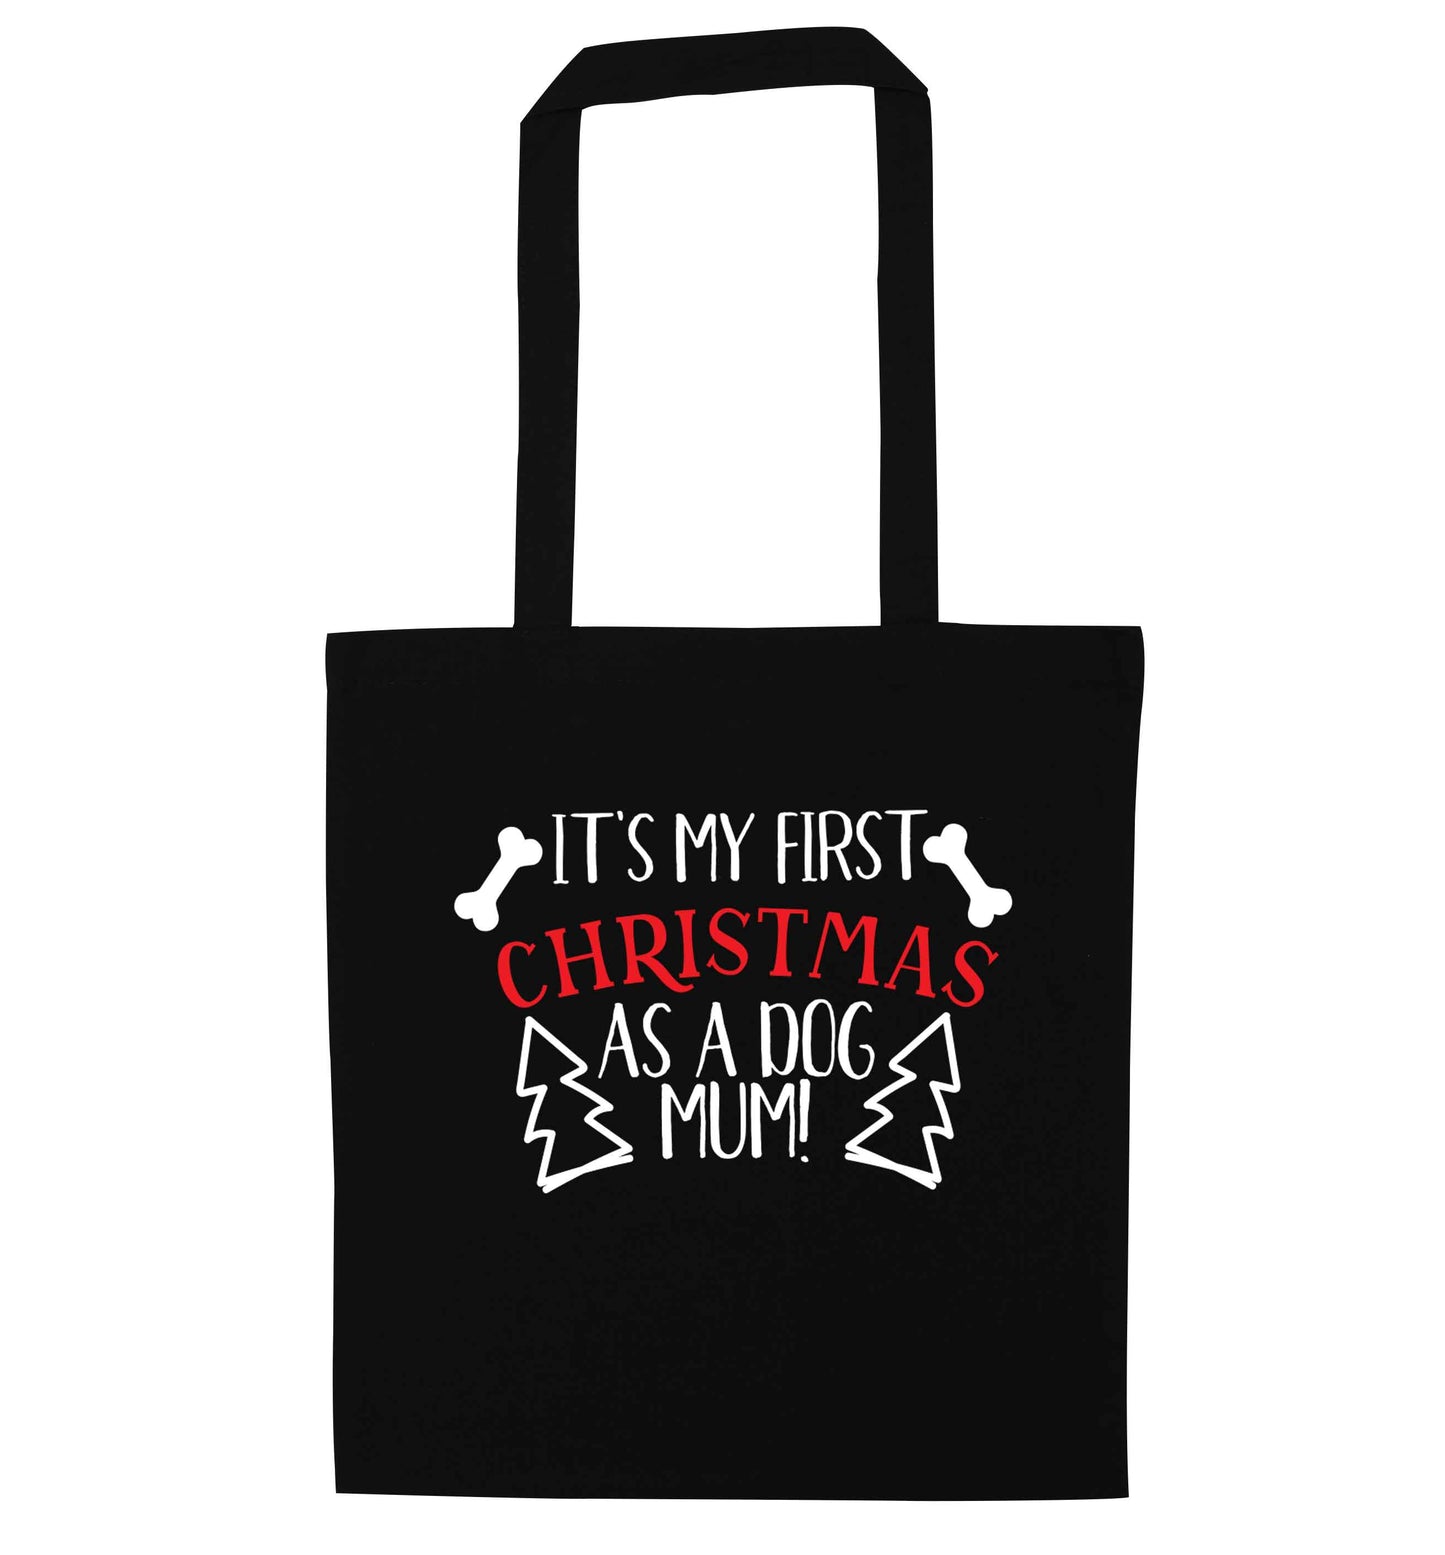 It's my first Christmas as a dog mum! black tote bag